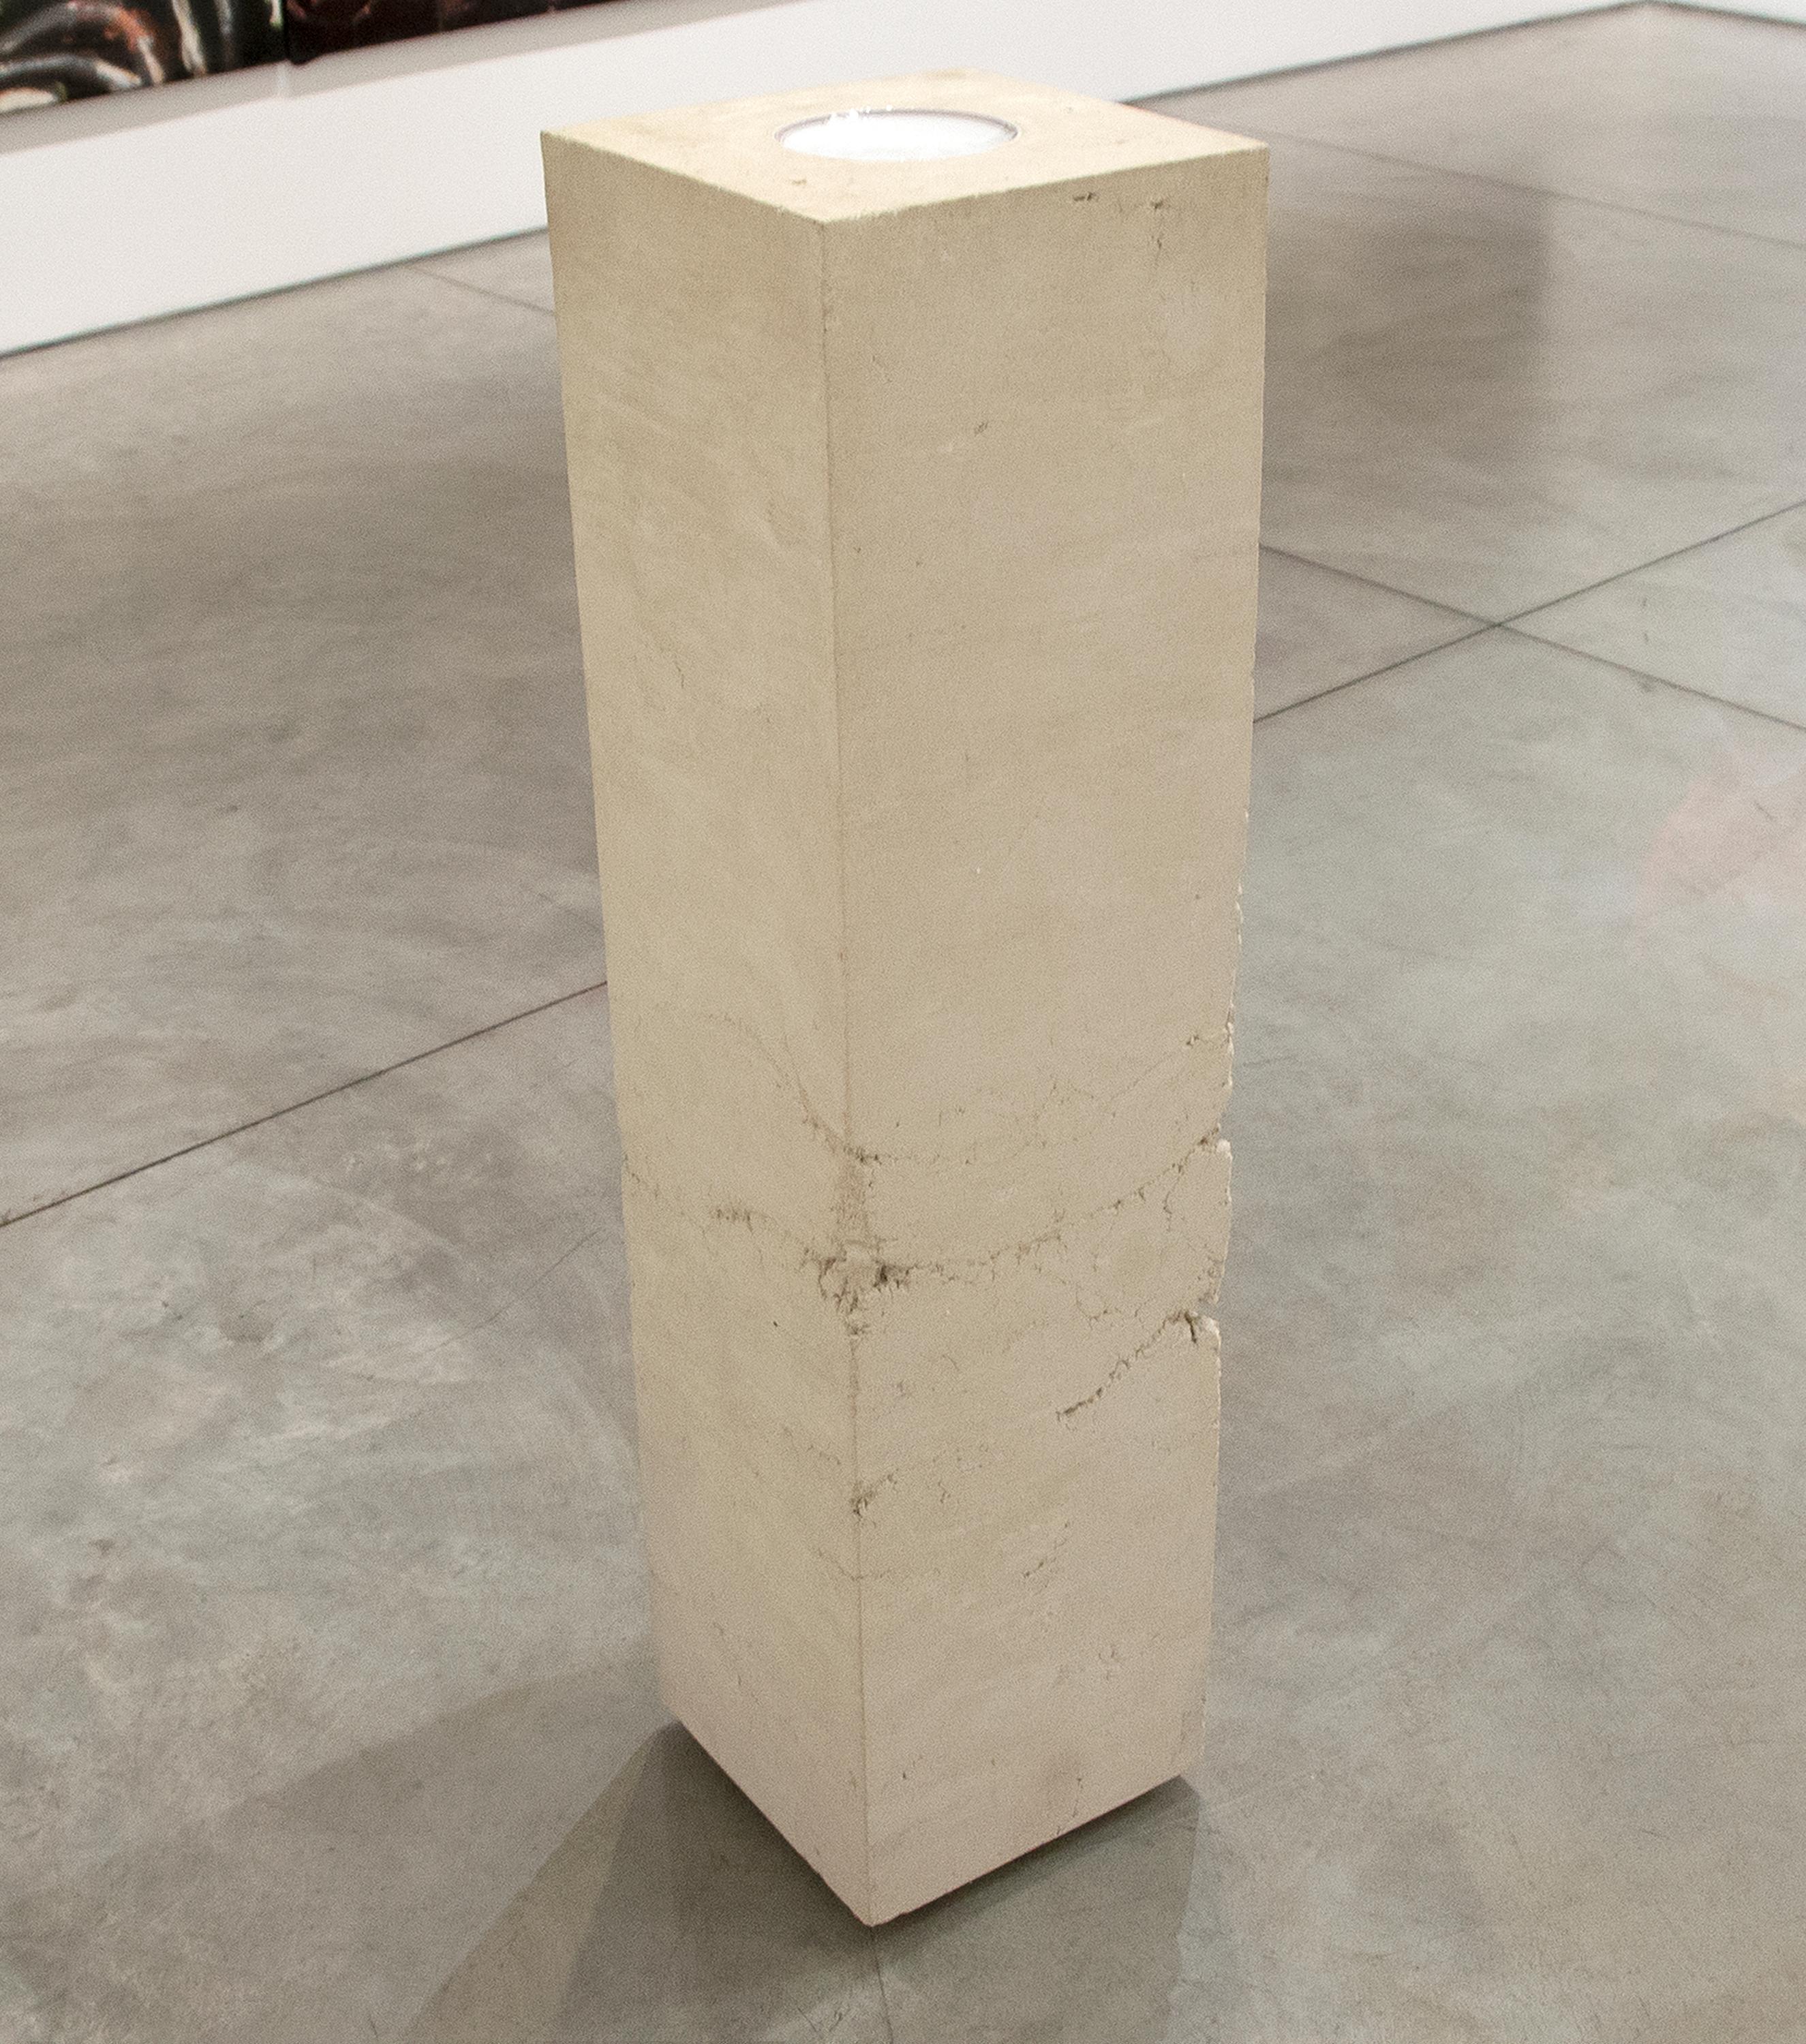 Stand-Ins for Period of Wreckage 25 - Sculpture by Theaster Gates